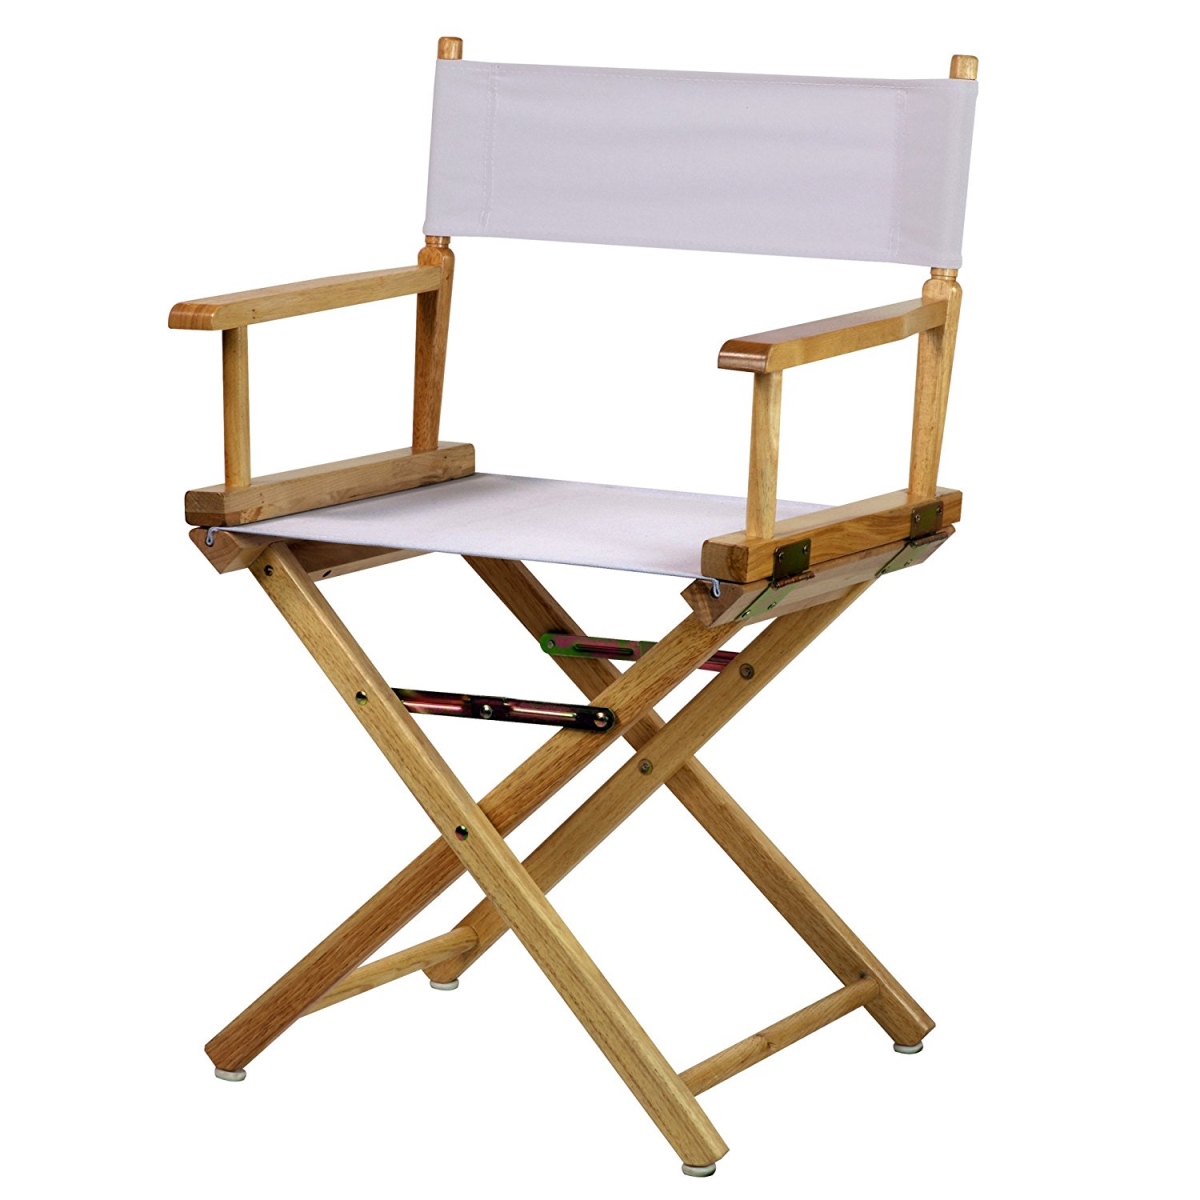 200-00-021-29 18 In. Directors Chair Natural Frame With White Canvas